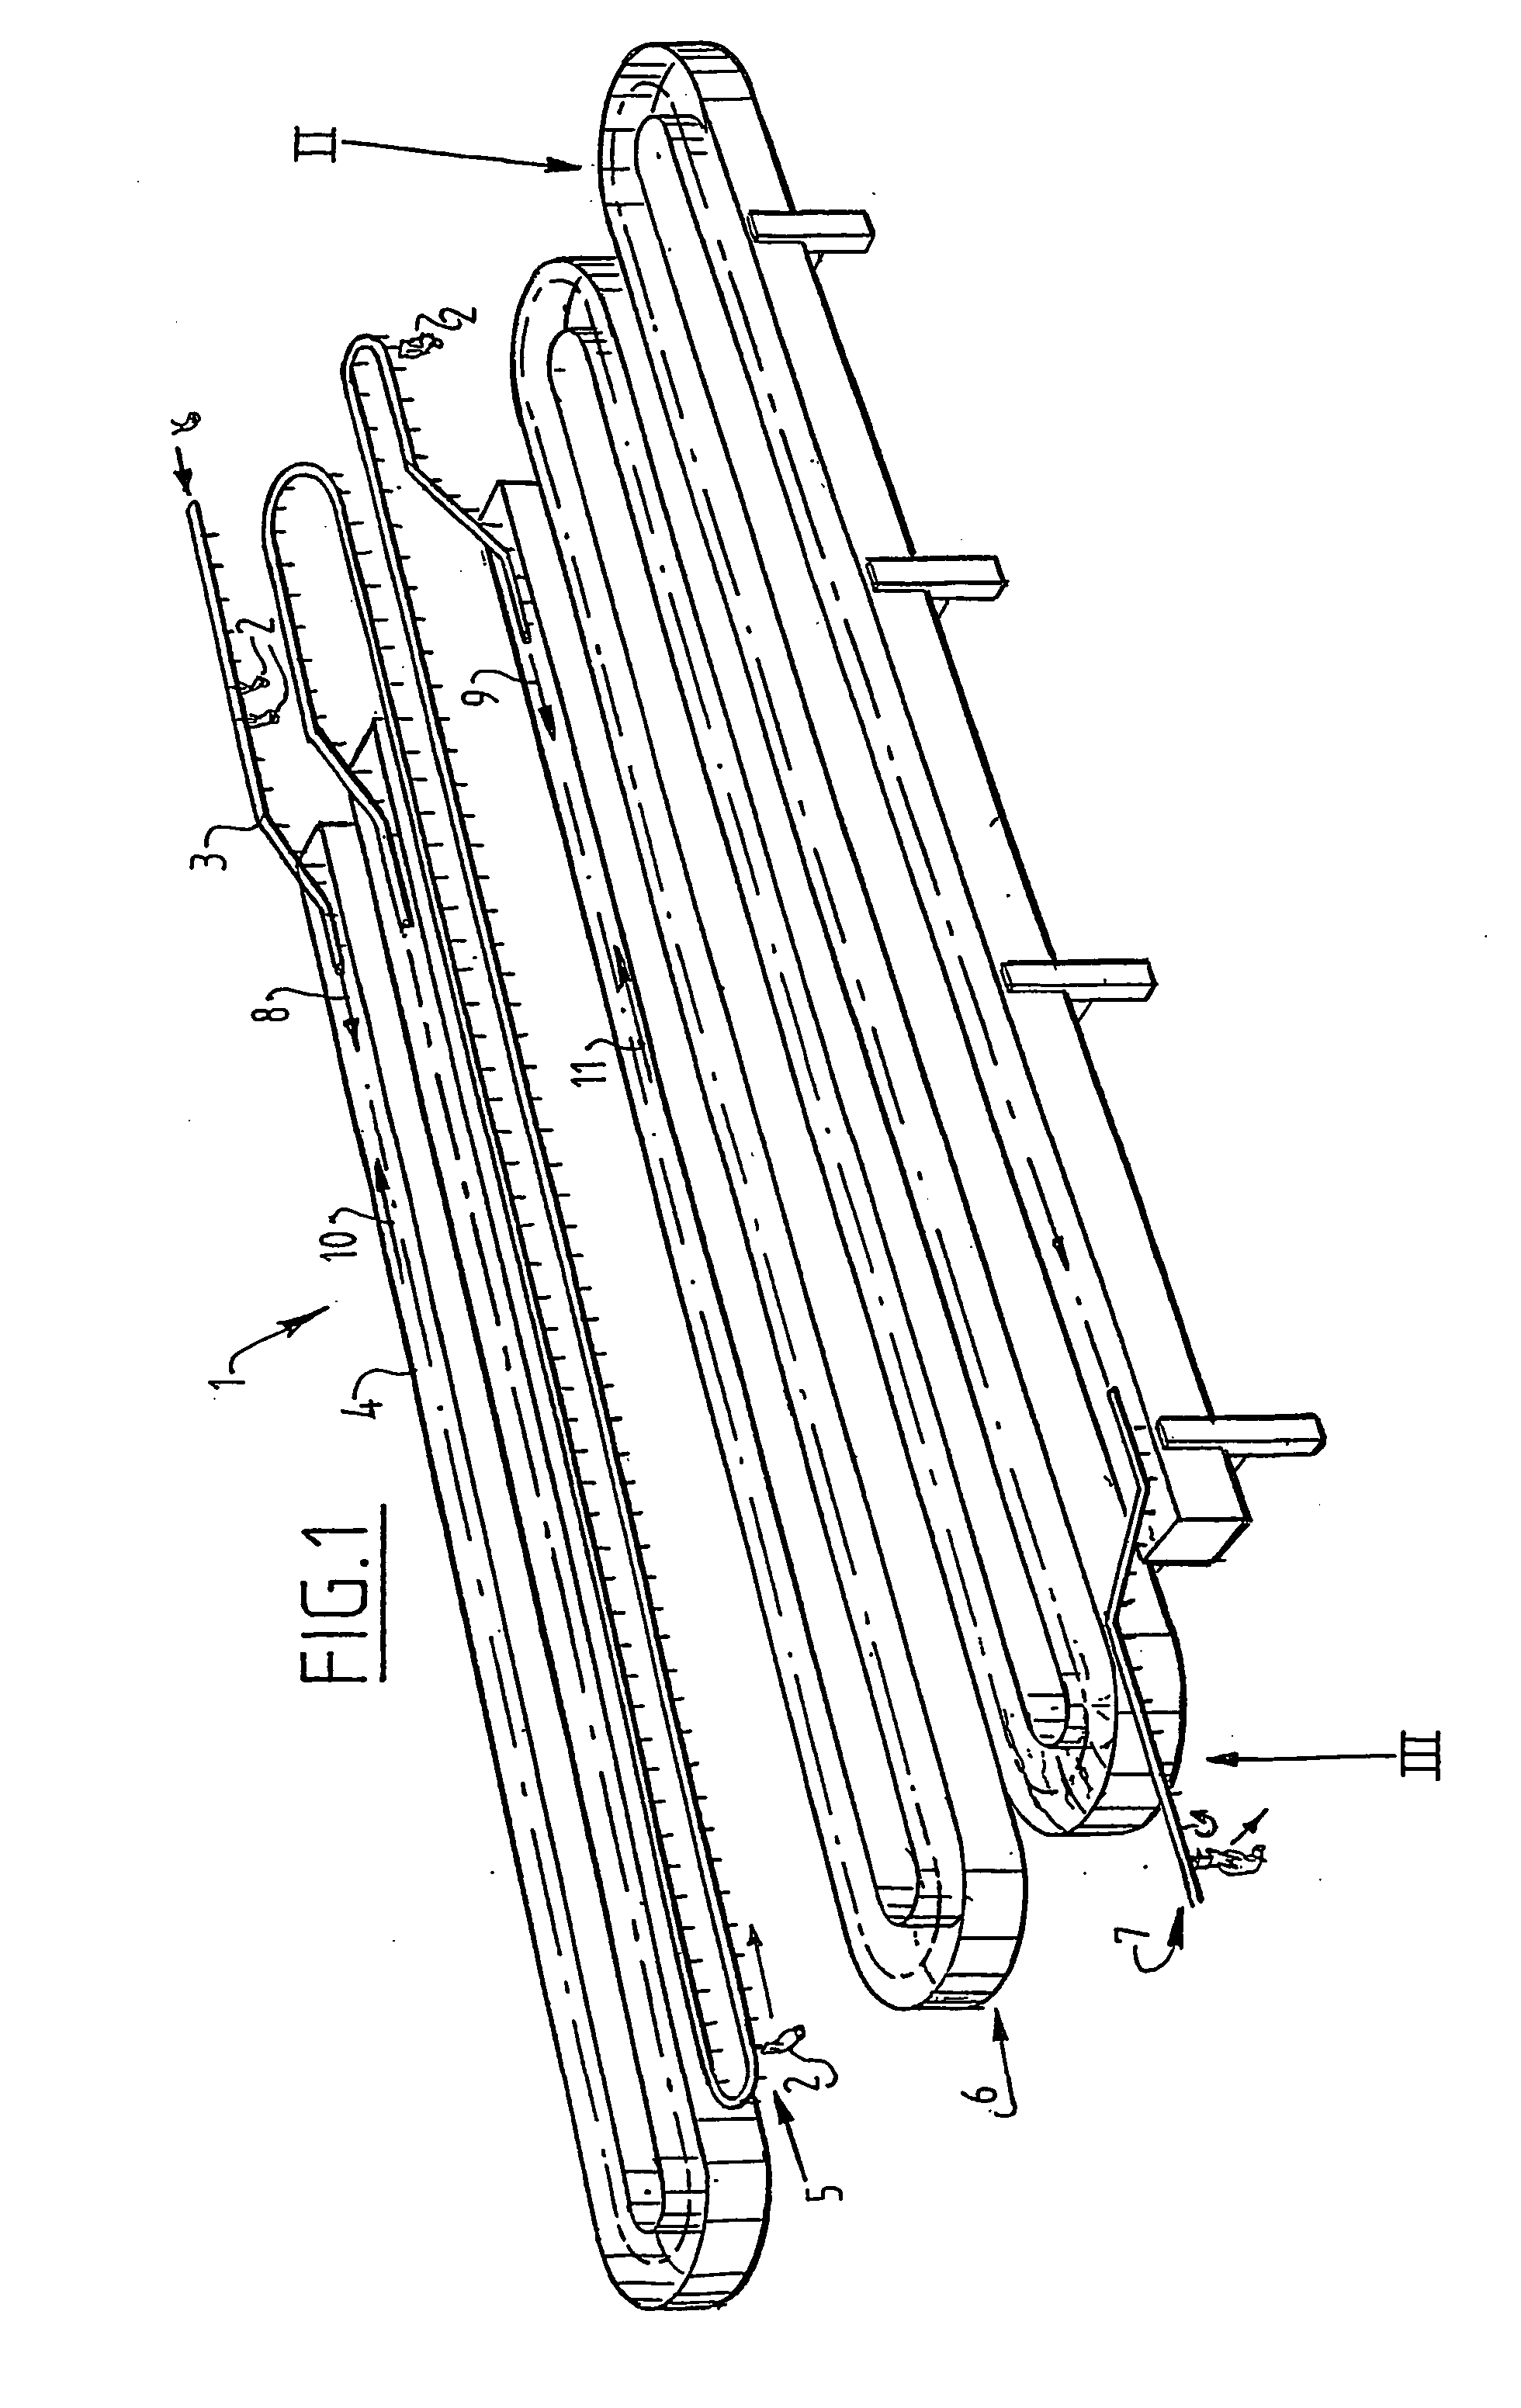 Method and installation for cooling slaughtered poultry